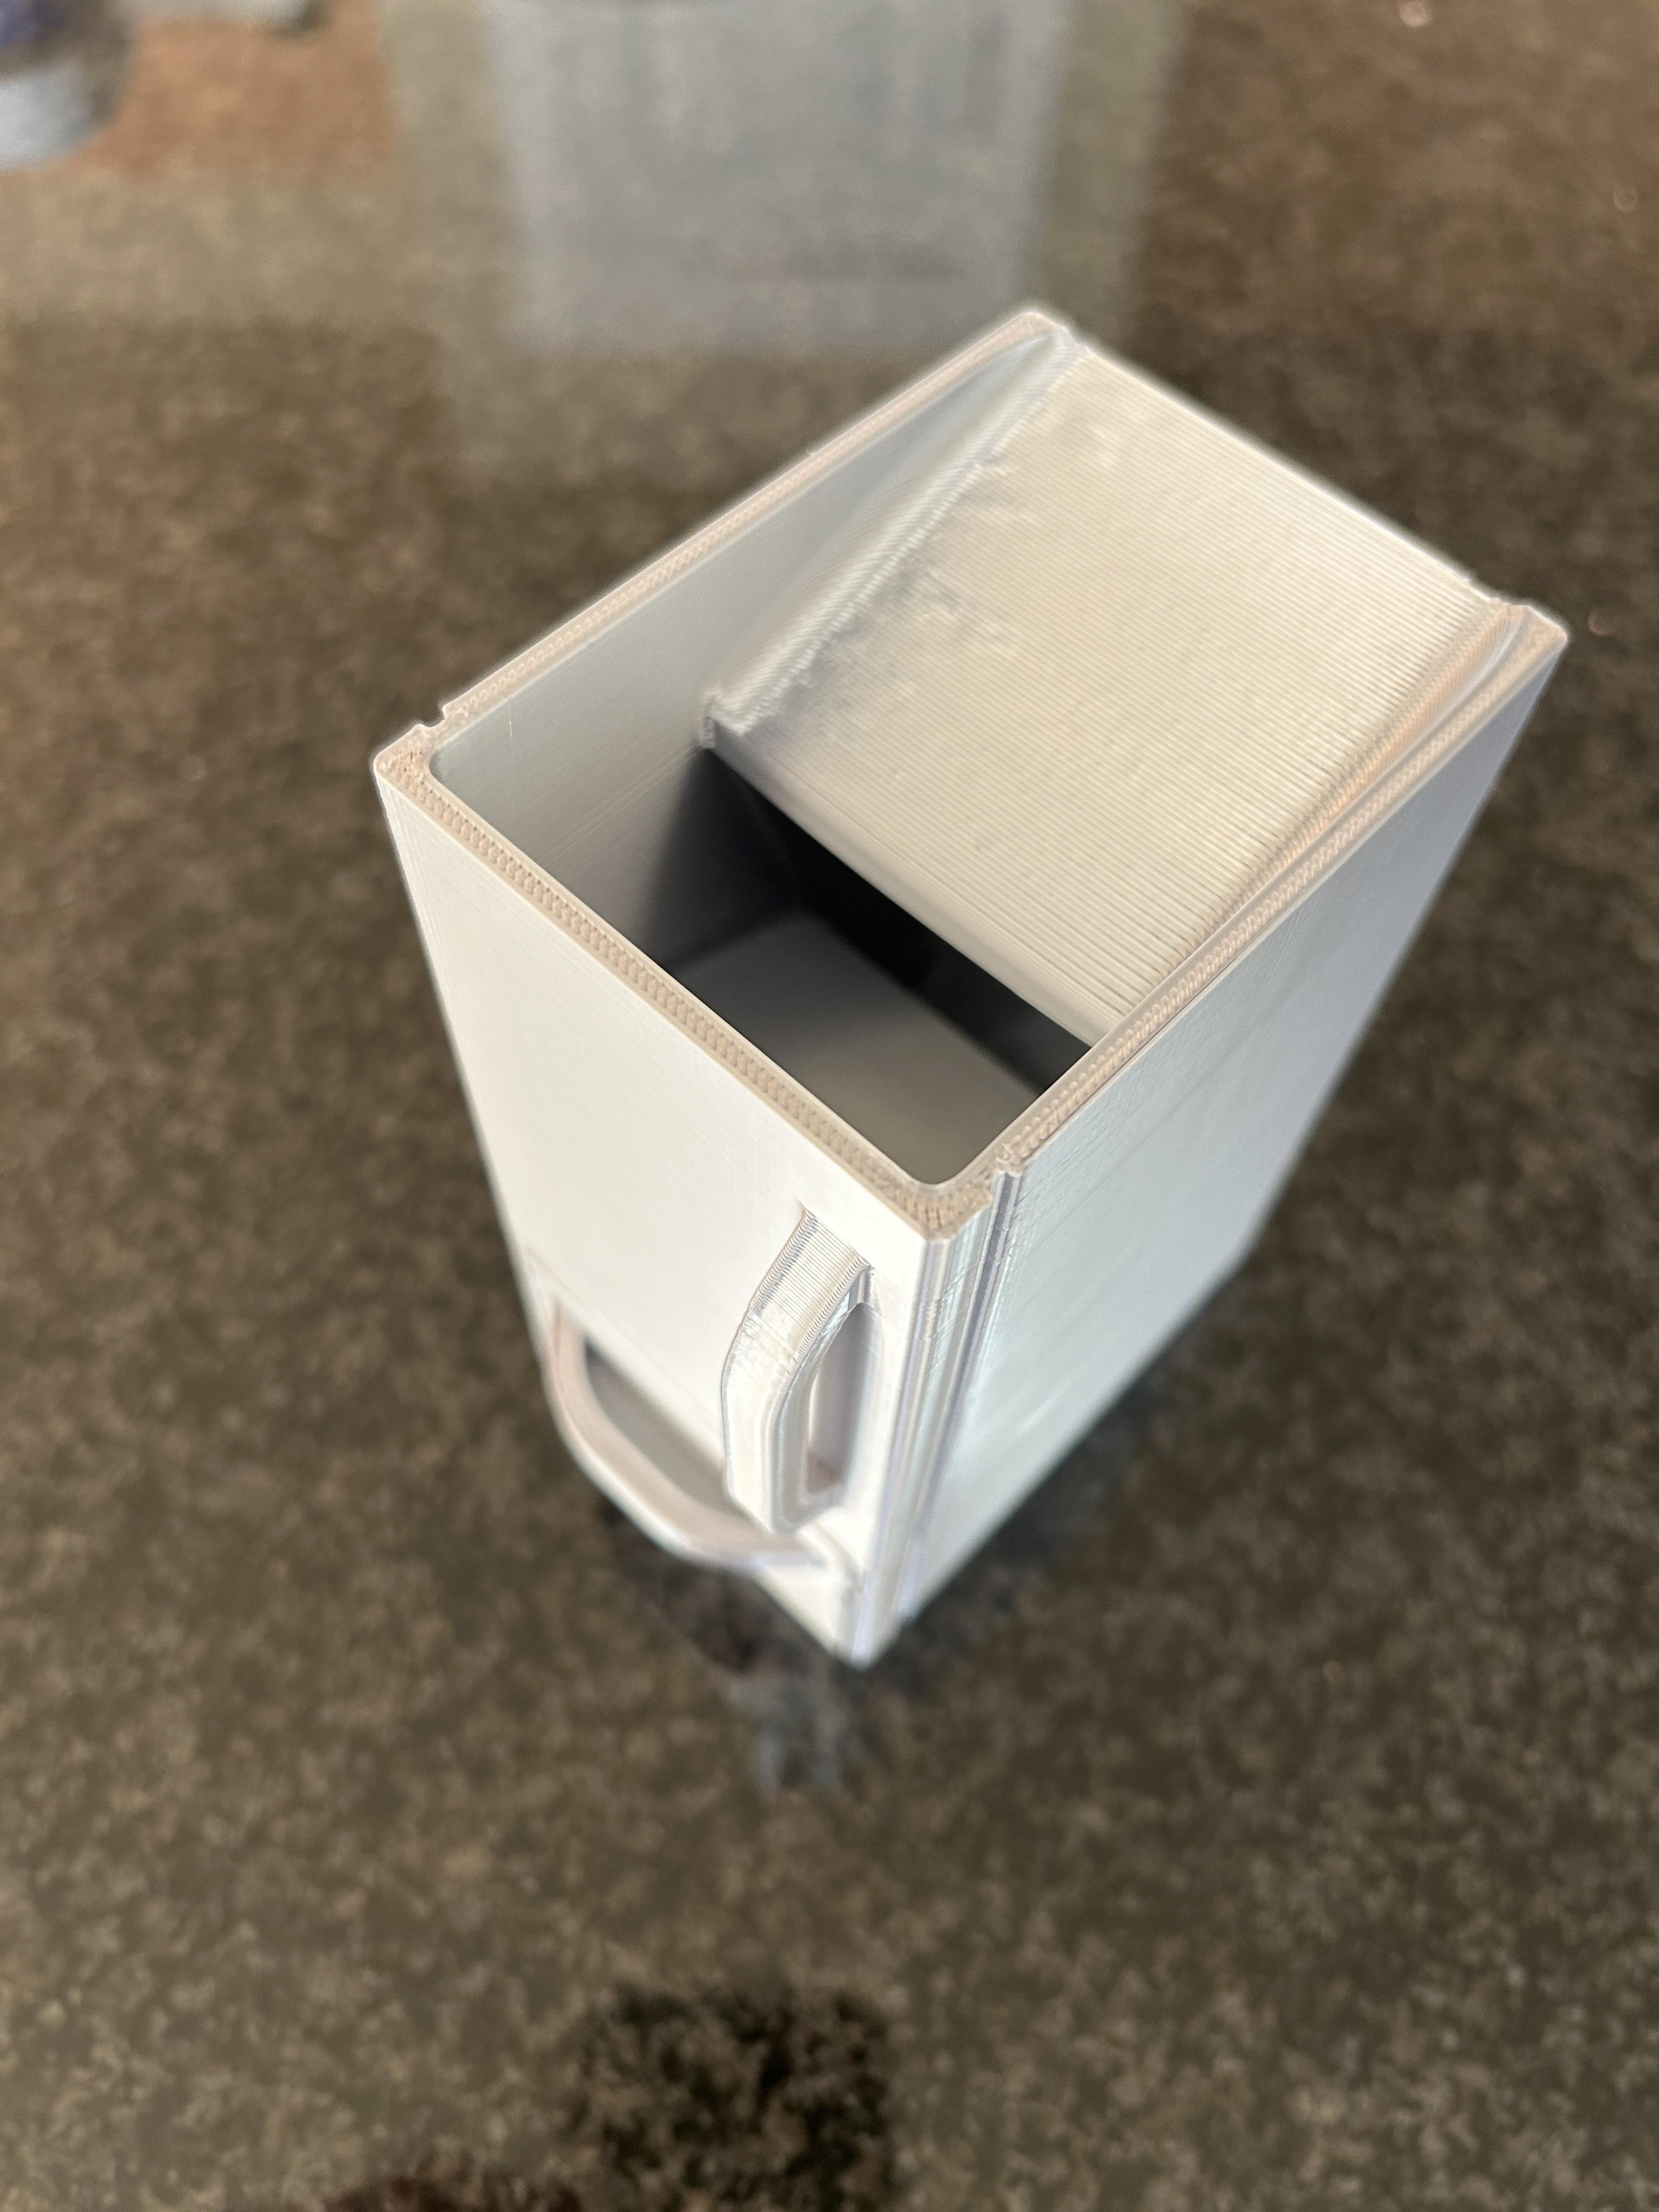 Dice Tower but it's a Refrigerator 3d model